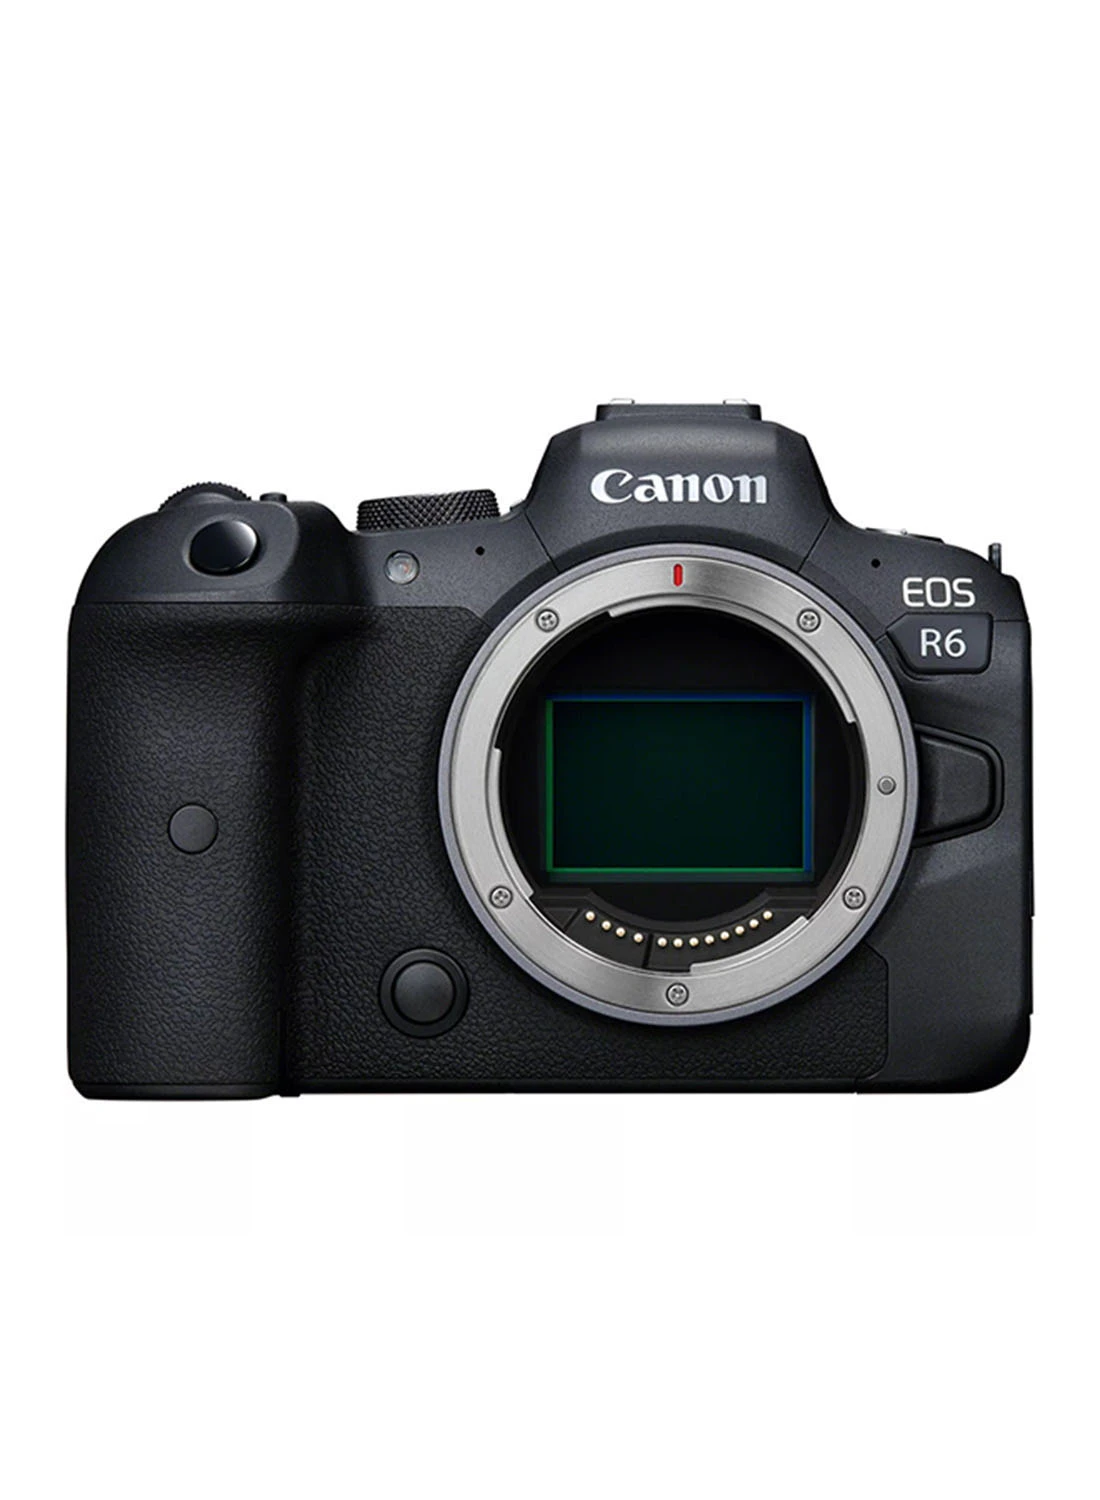 Canon EOS R6 Mirrorless Camera Body، Full-frame، 20 MP، Up to 8-stop in Body IS، 20 fps، 4K 60p Movies، Bluetooth & Wi-Fi، Max ISO 102،400